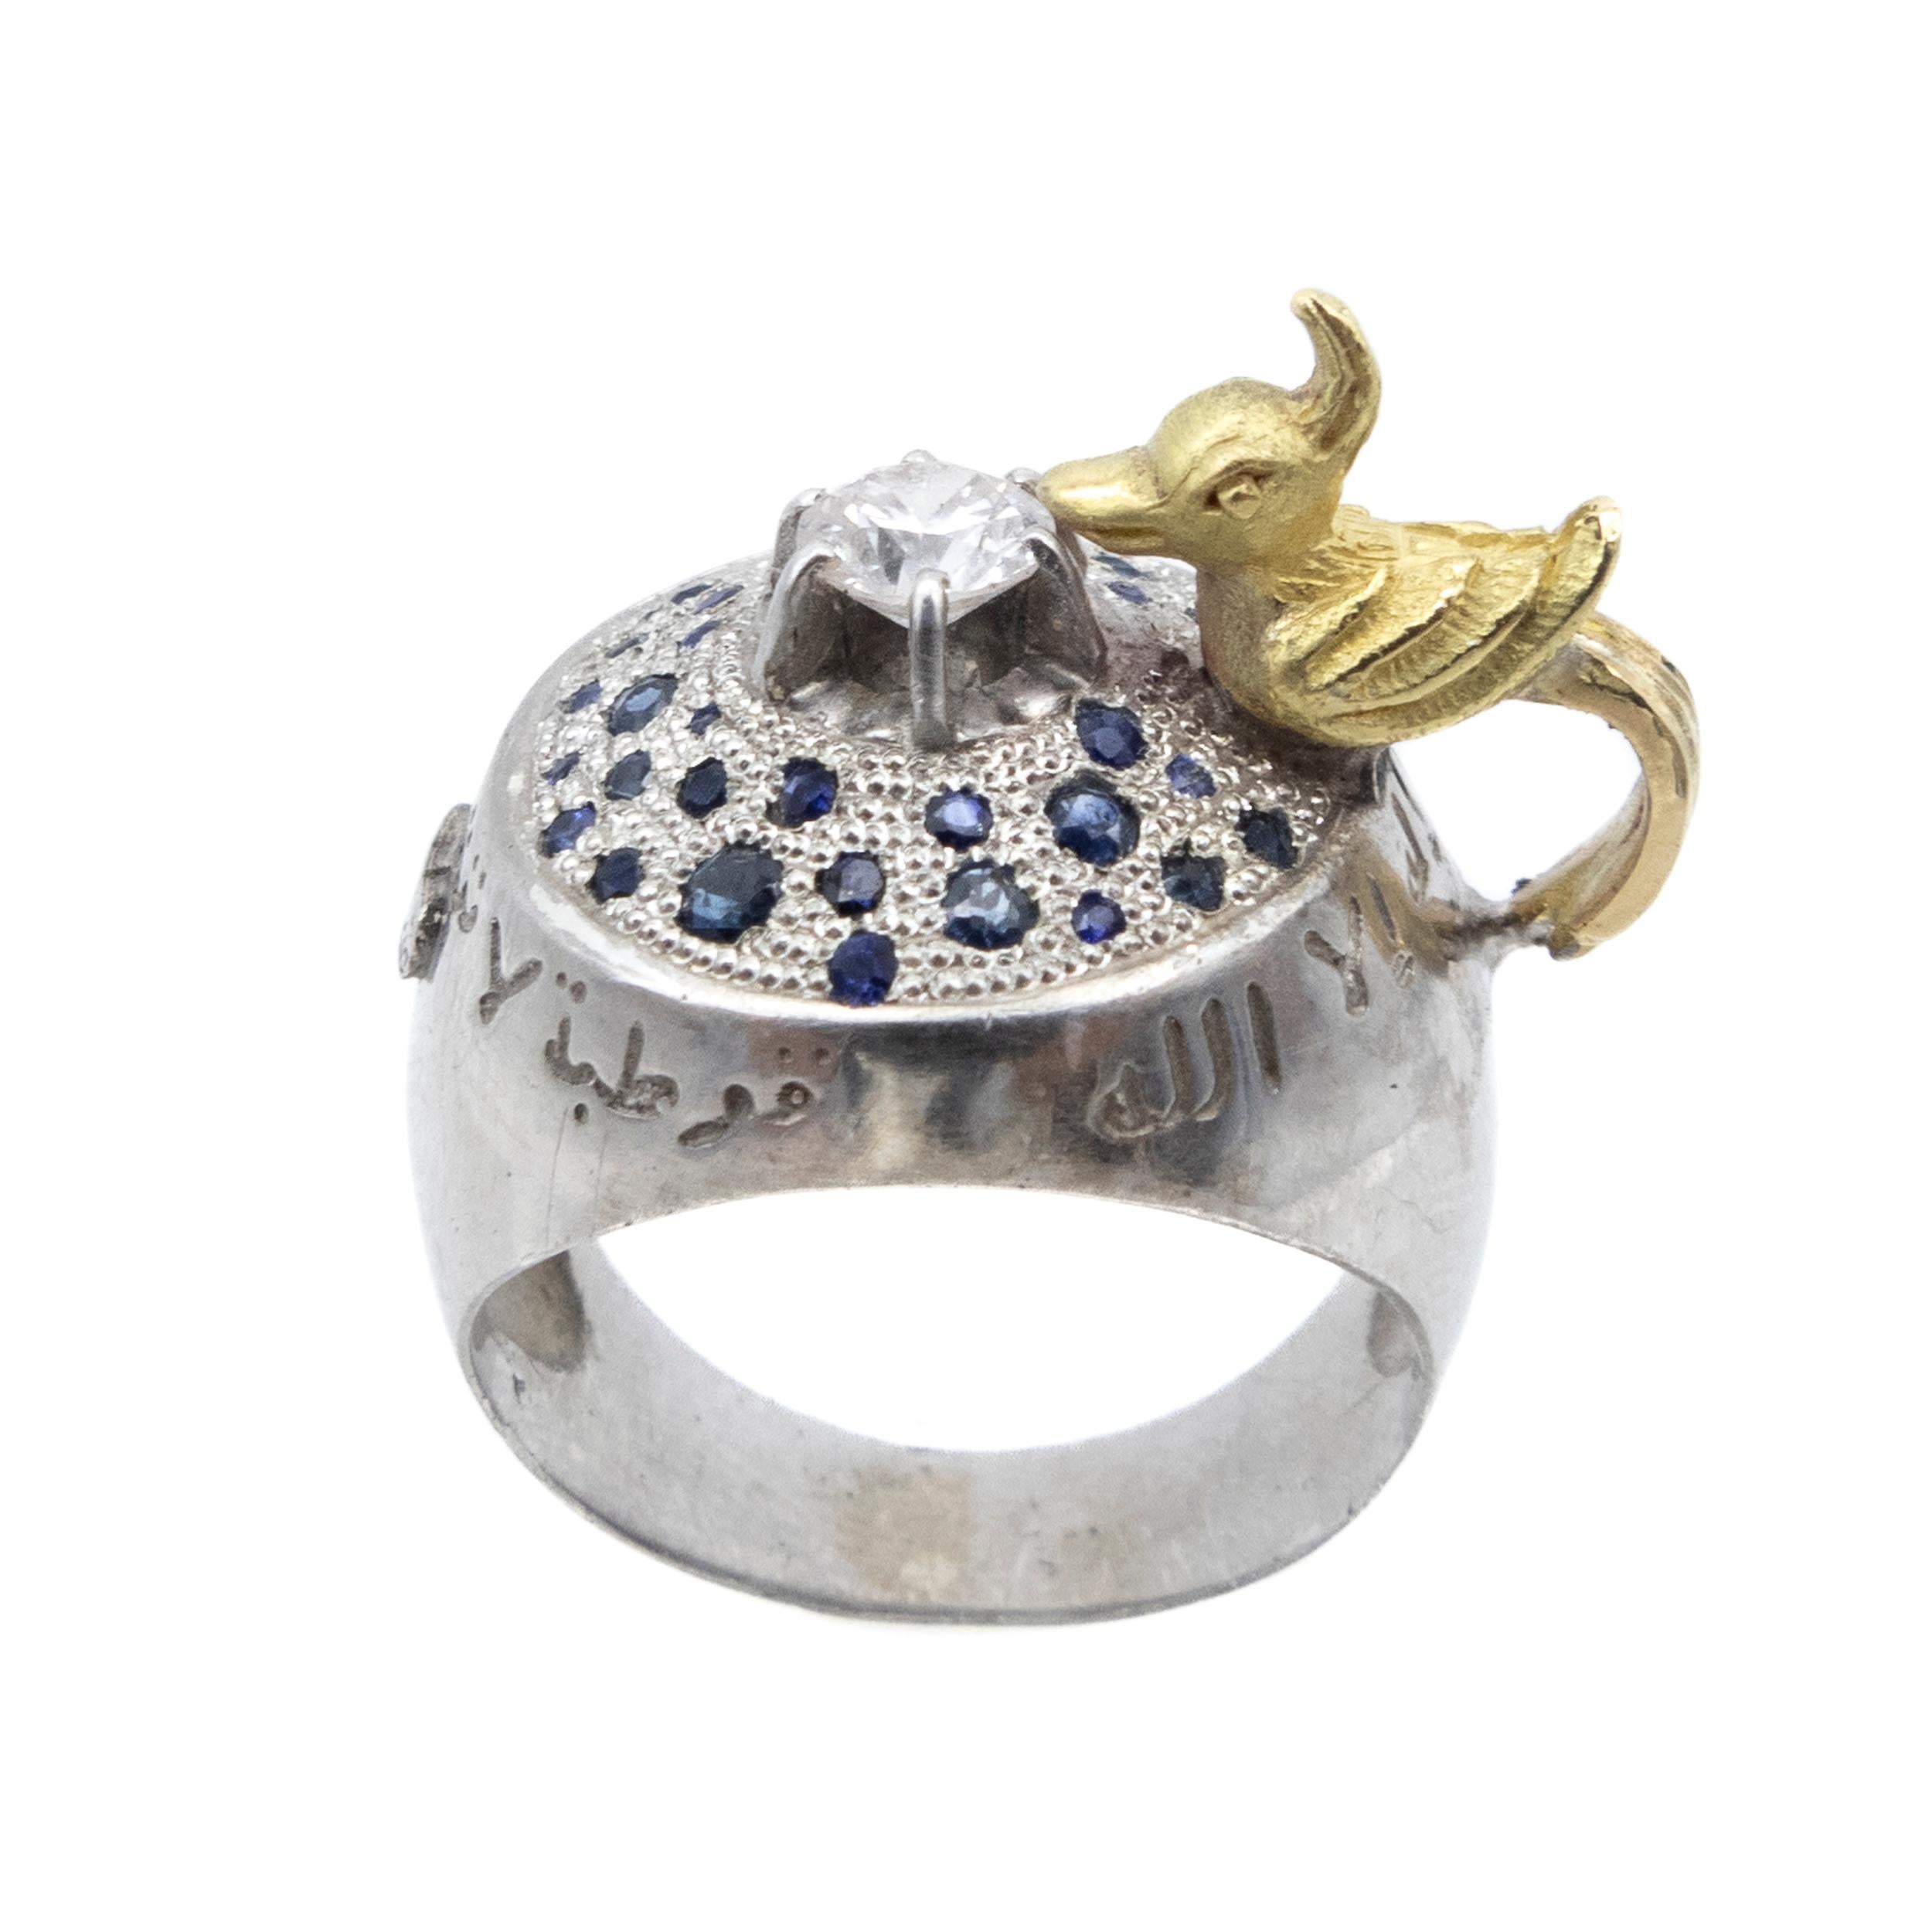 21st Century Diamond Sapphires Paradise Bird Yellow 18 Karat Gold Silver Ring  

Introducing our Exquisite Rhodium-Plated Silver Ring with a Paradise Bird in 18 Karat Yellow Gold, sapphires and a 4.60 mm Brilliant-Cut Diamond.

Step into a world of